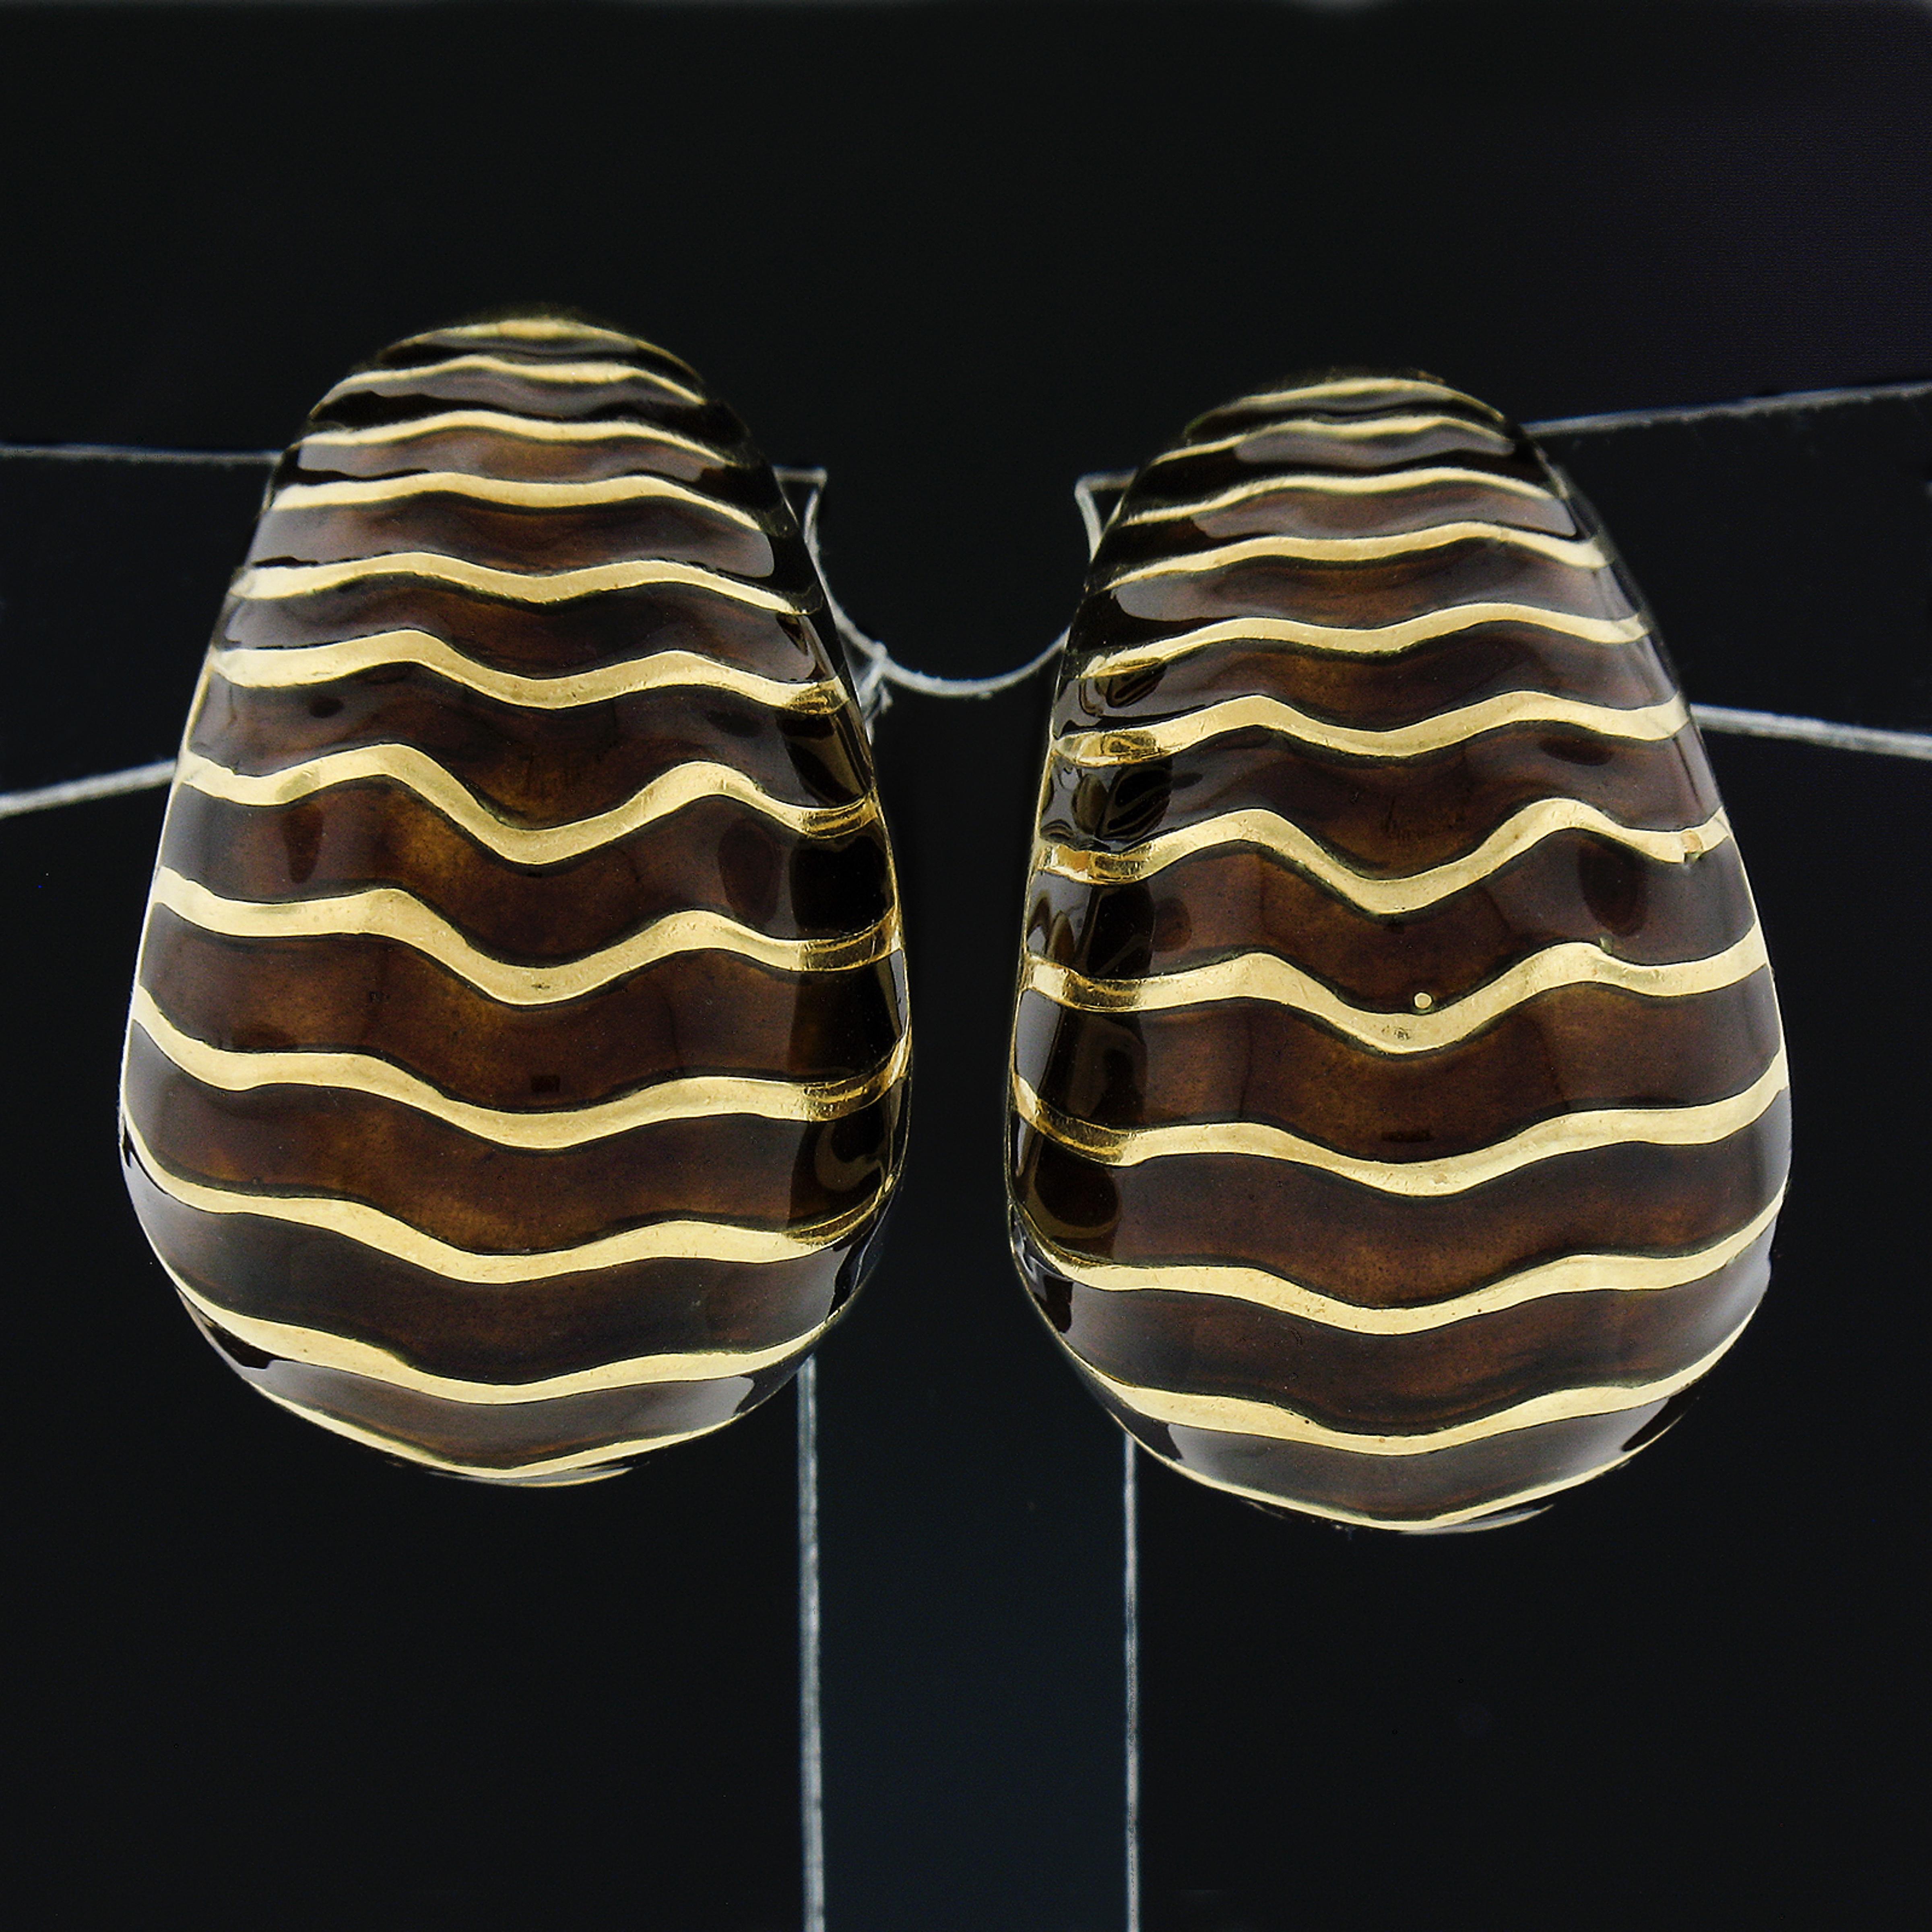 These large and absolutely beautiful vintage cuff earrings were crafted in from solid 18k yellow gold. They feature a bold yet super elegant design that widens at its bottom, displaying a lovely alternating wavy pattern of high polished yellow gold